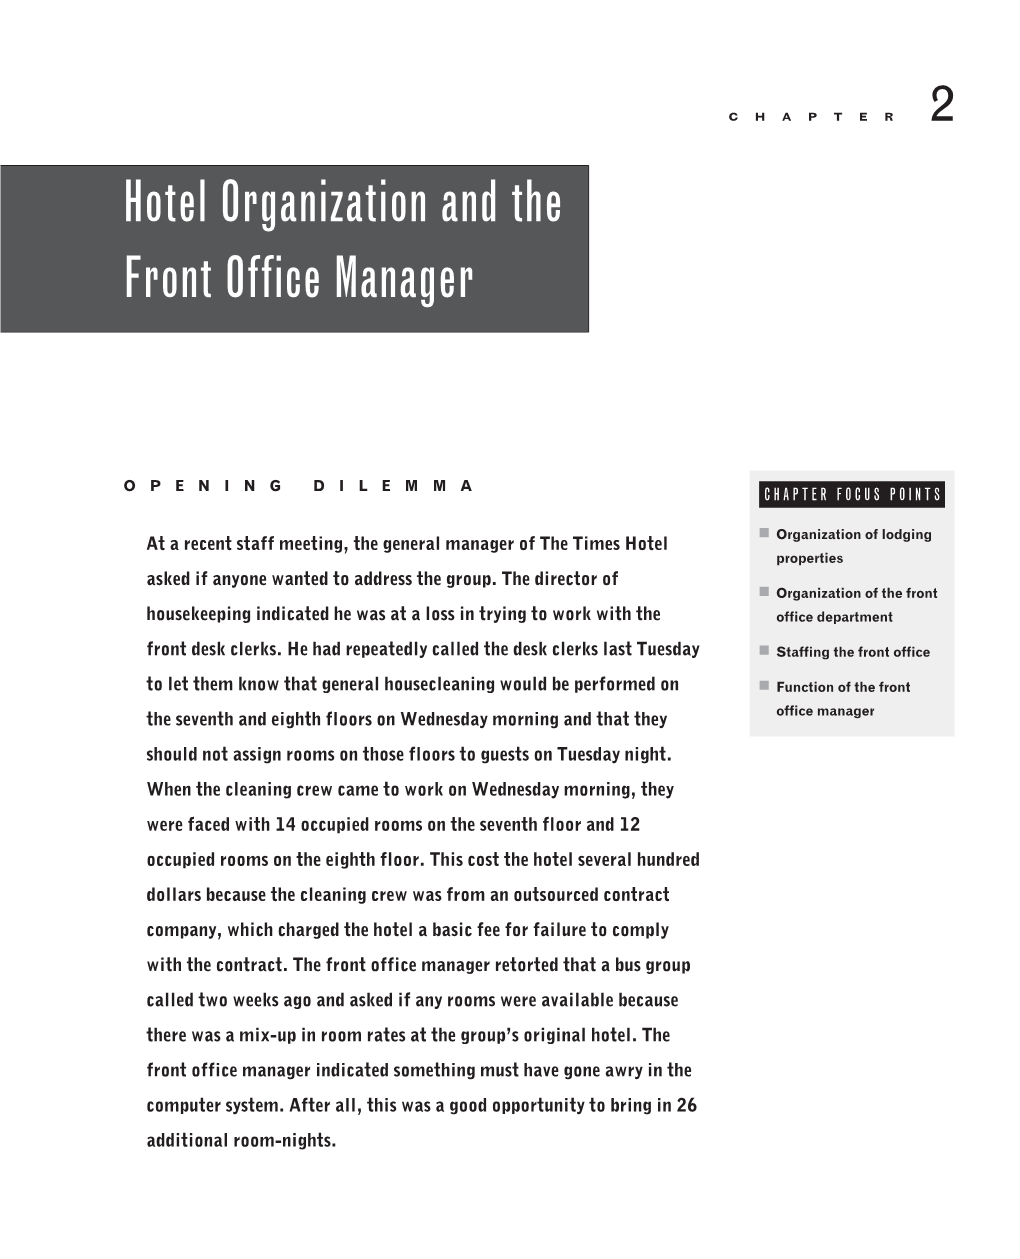 Hotel Organization and the Front Office Manager